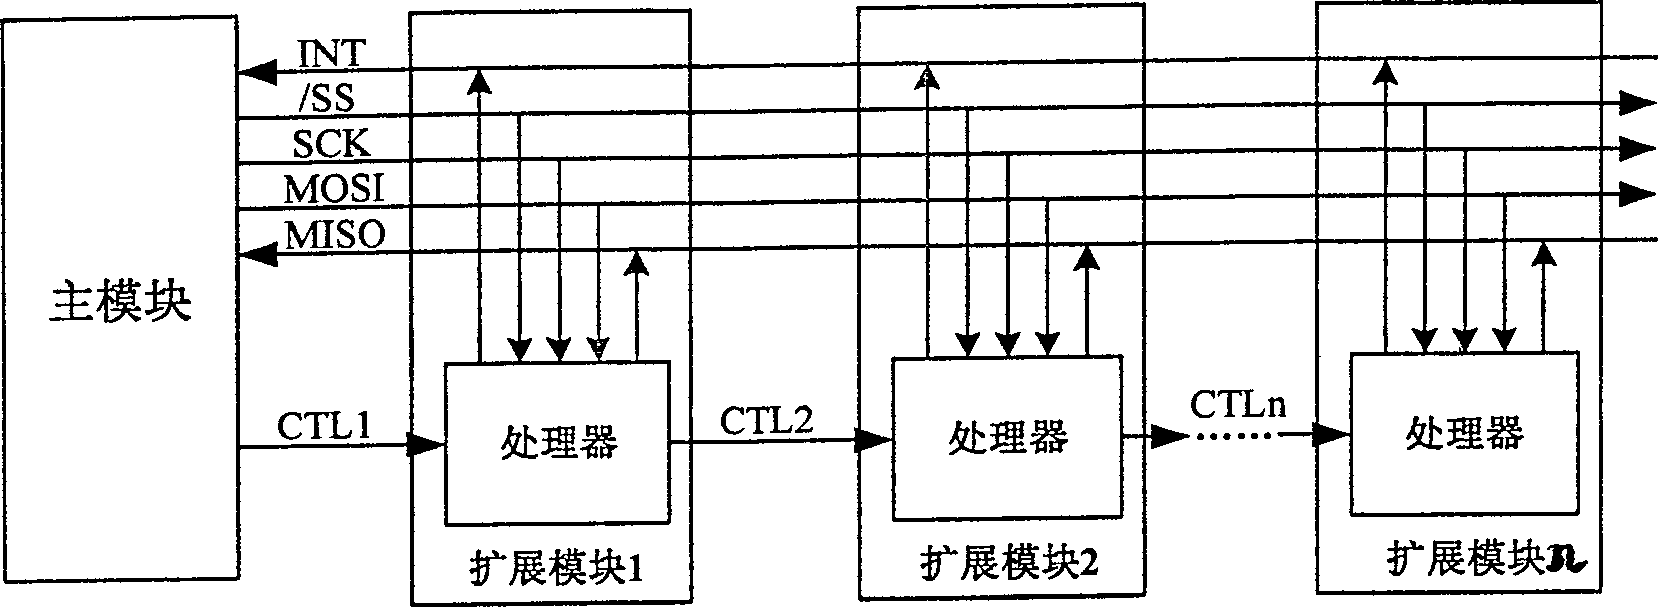 Programmable logic controller and expansion module interface